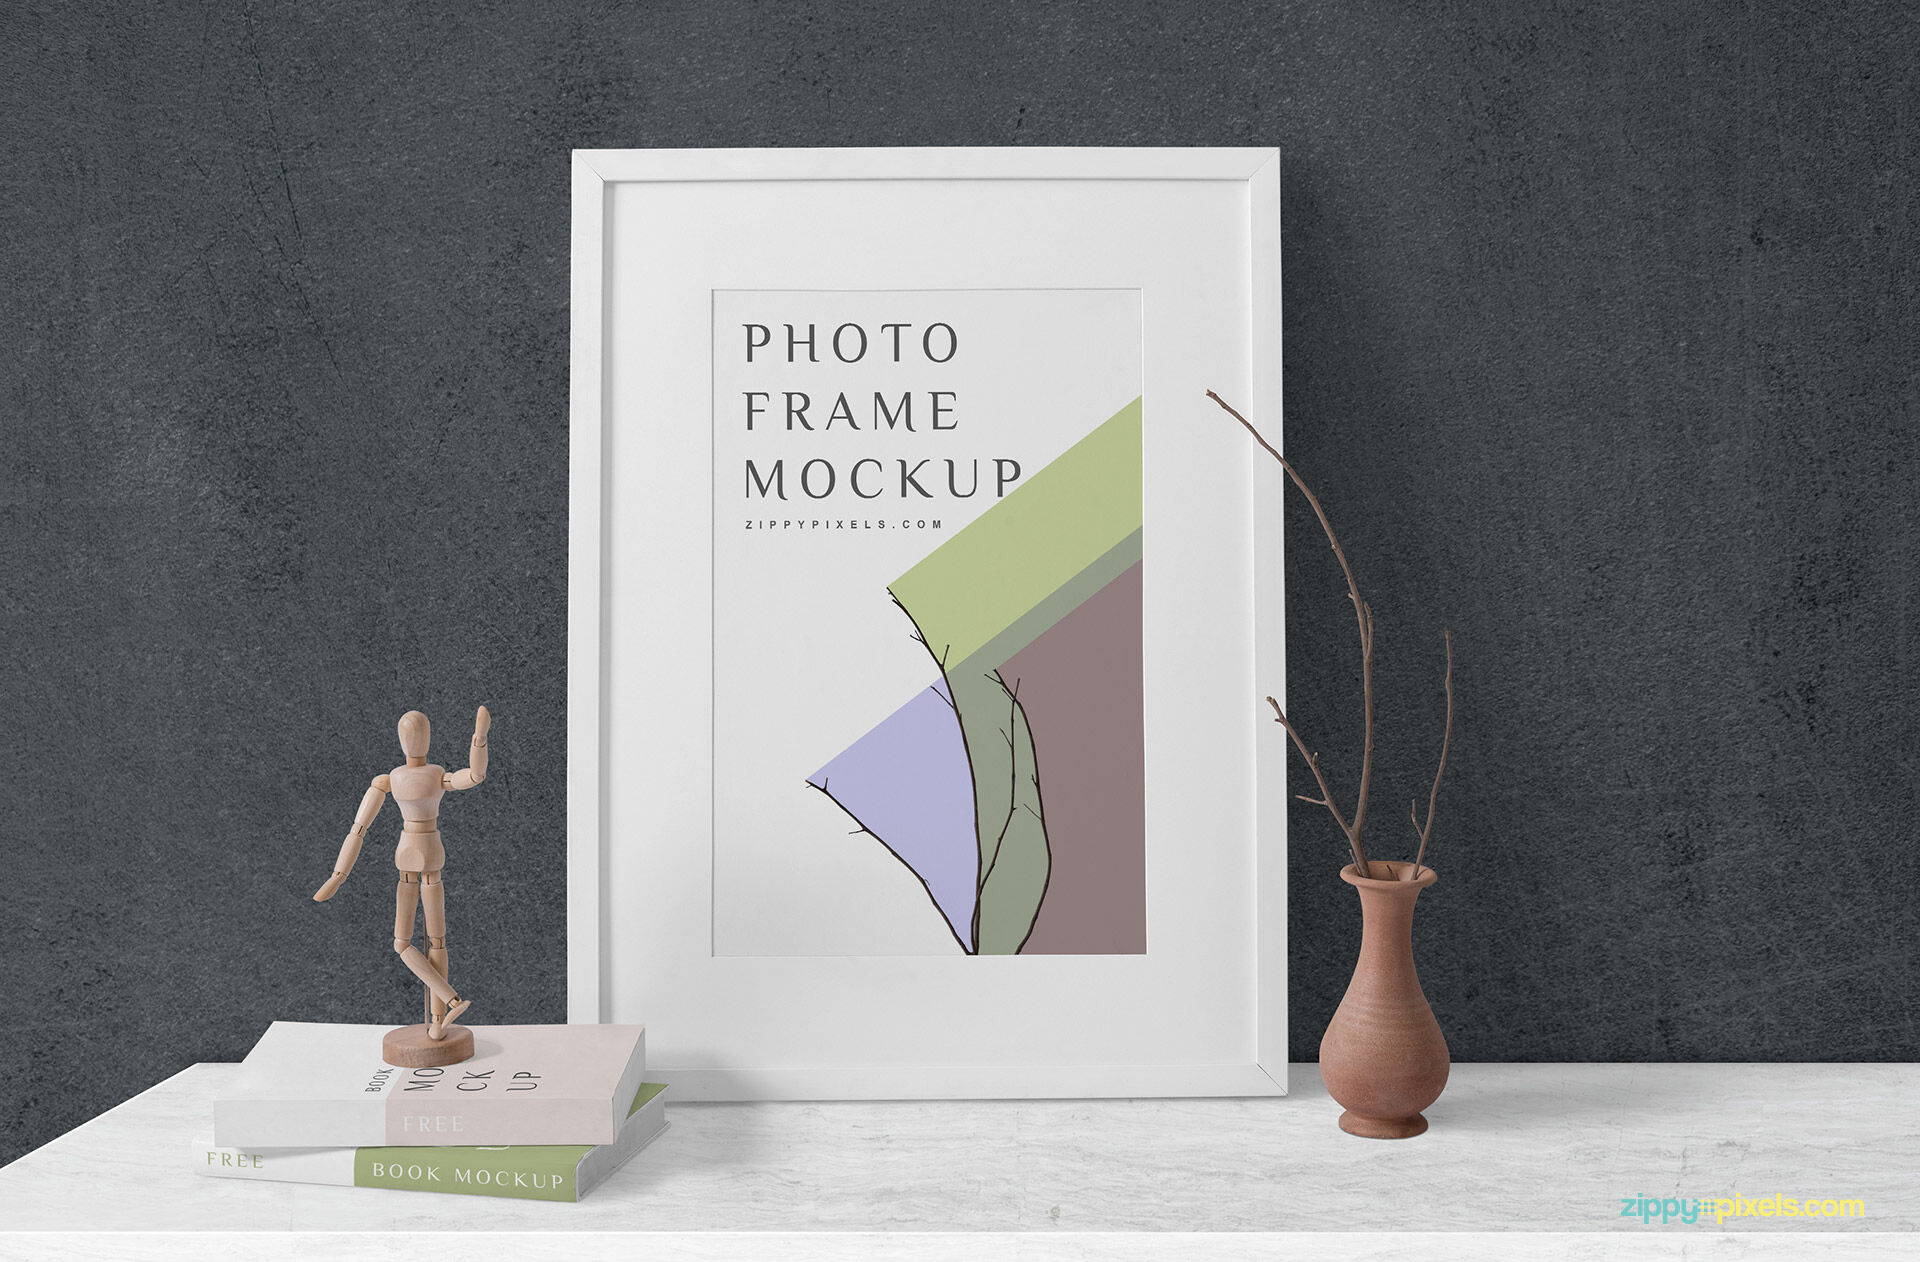 Wooden Frame Mockup with Books and Decorative Elements FREE PSD